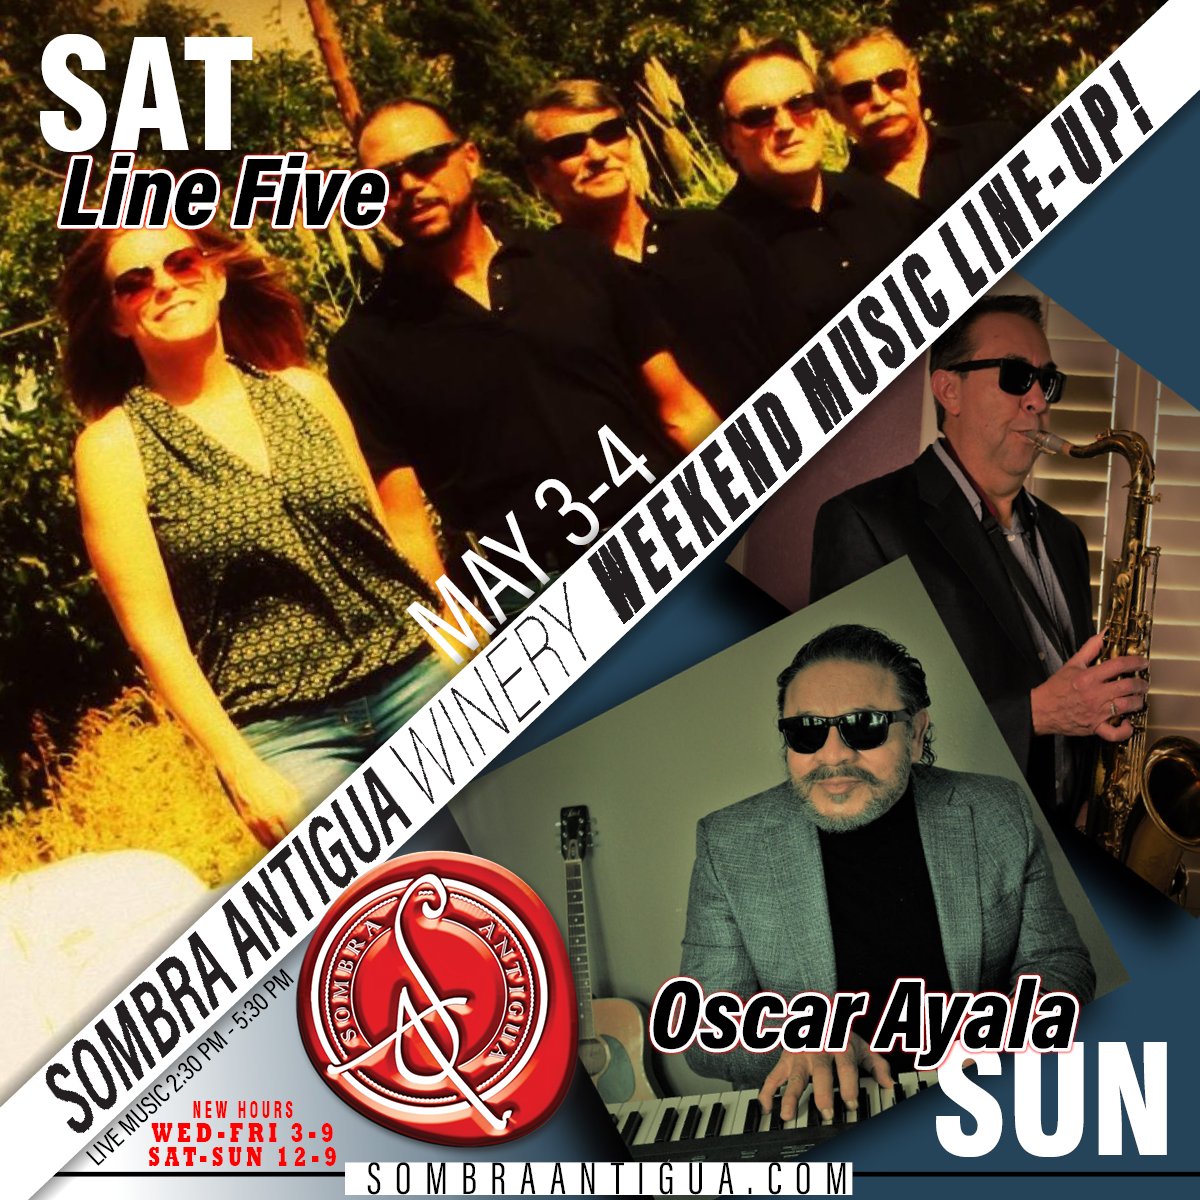 Hey there! Guess what? We have a fantastic line-up for you this weekend. The amazing Line Five will be performing on Saturday, and the talented Oscar Ayala will grace us with his music on Sunday. We can't wait to see you there!